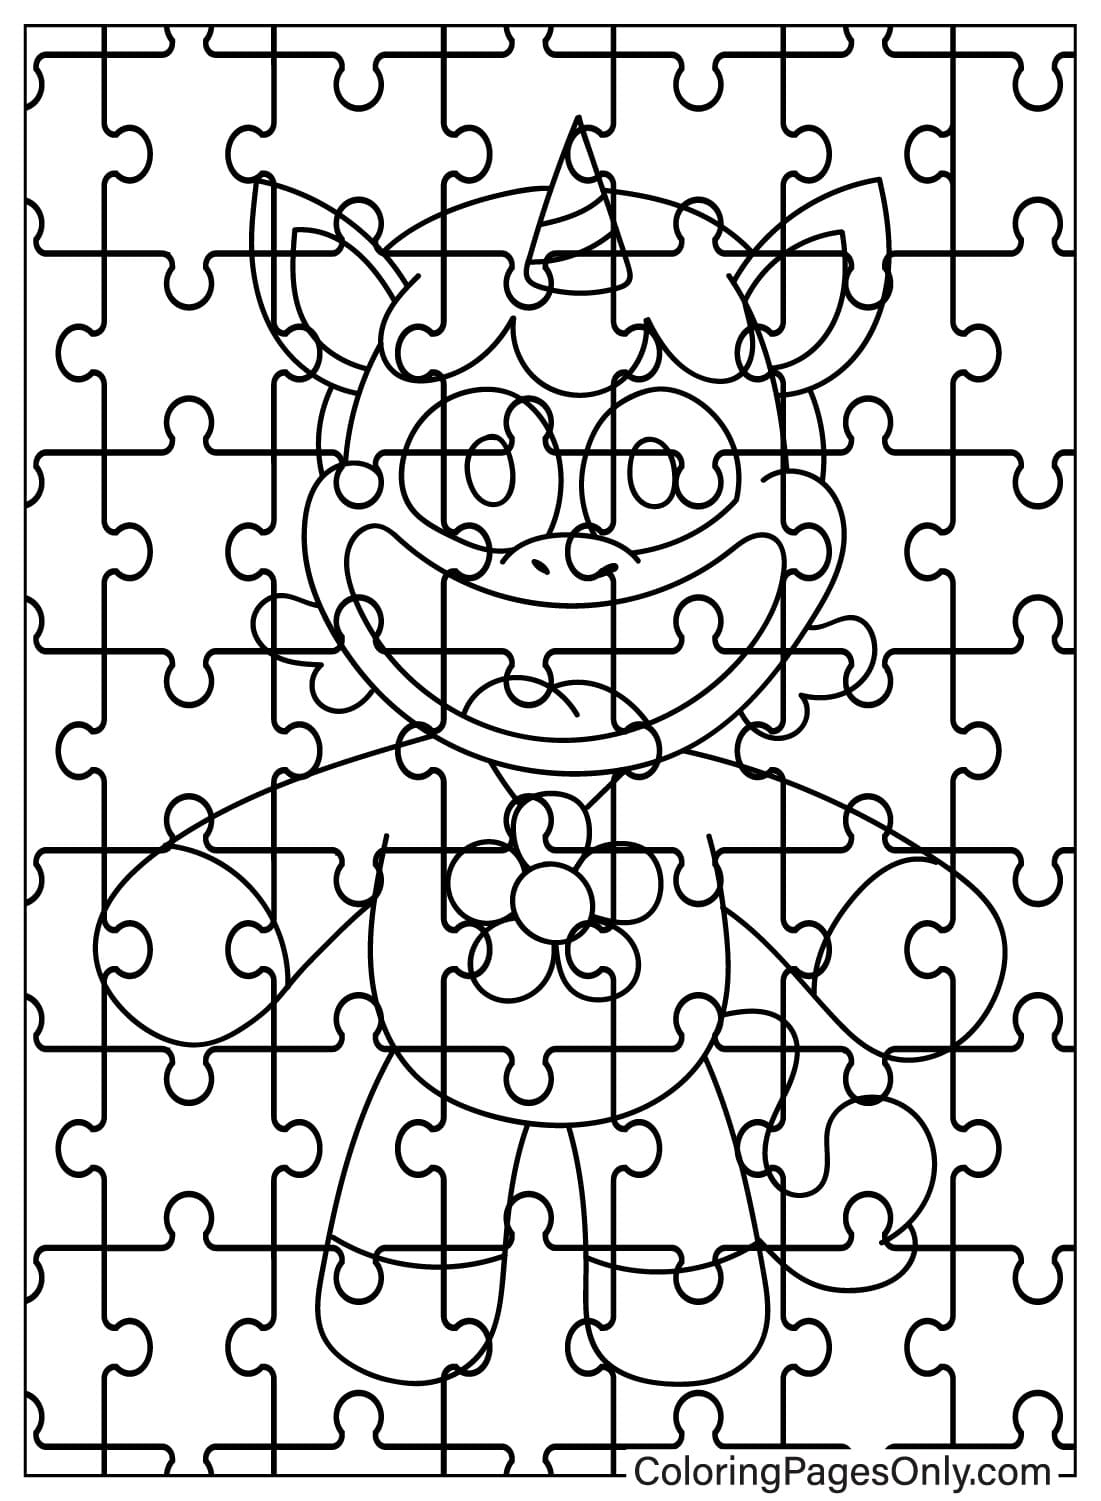 Jigsaw Puzzle CraftyCorn Coloring Page from CraftyCorn